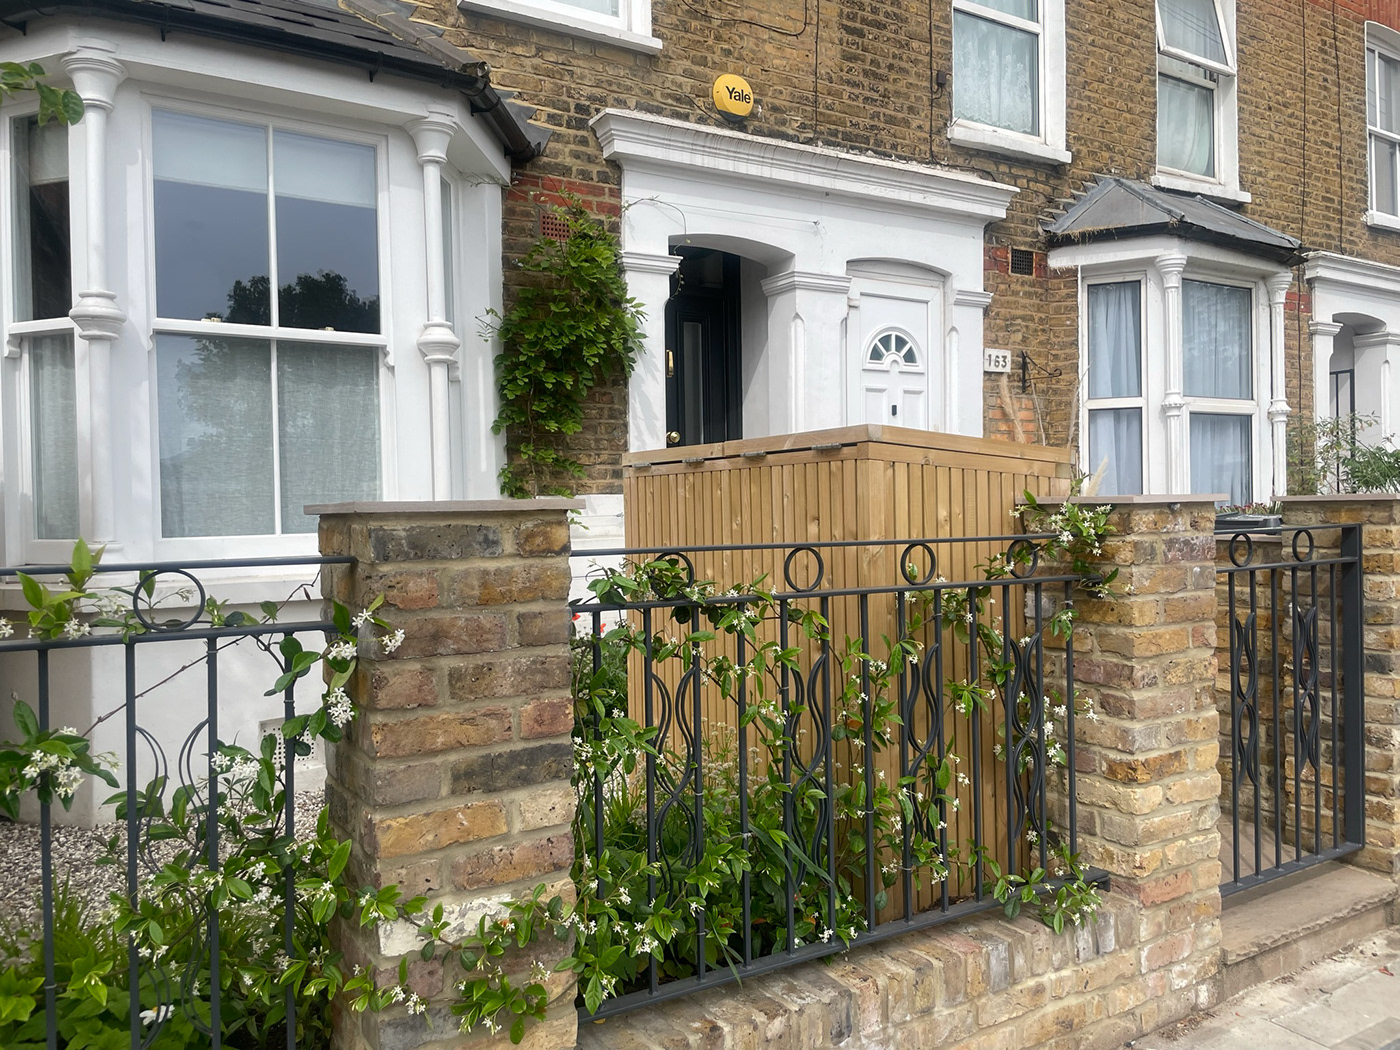 Custom Art Nouveau style railings allow a glimpse into the planting in this redesigned front garden